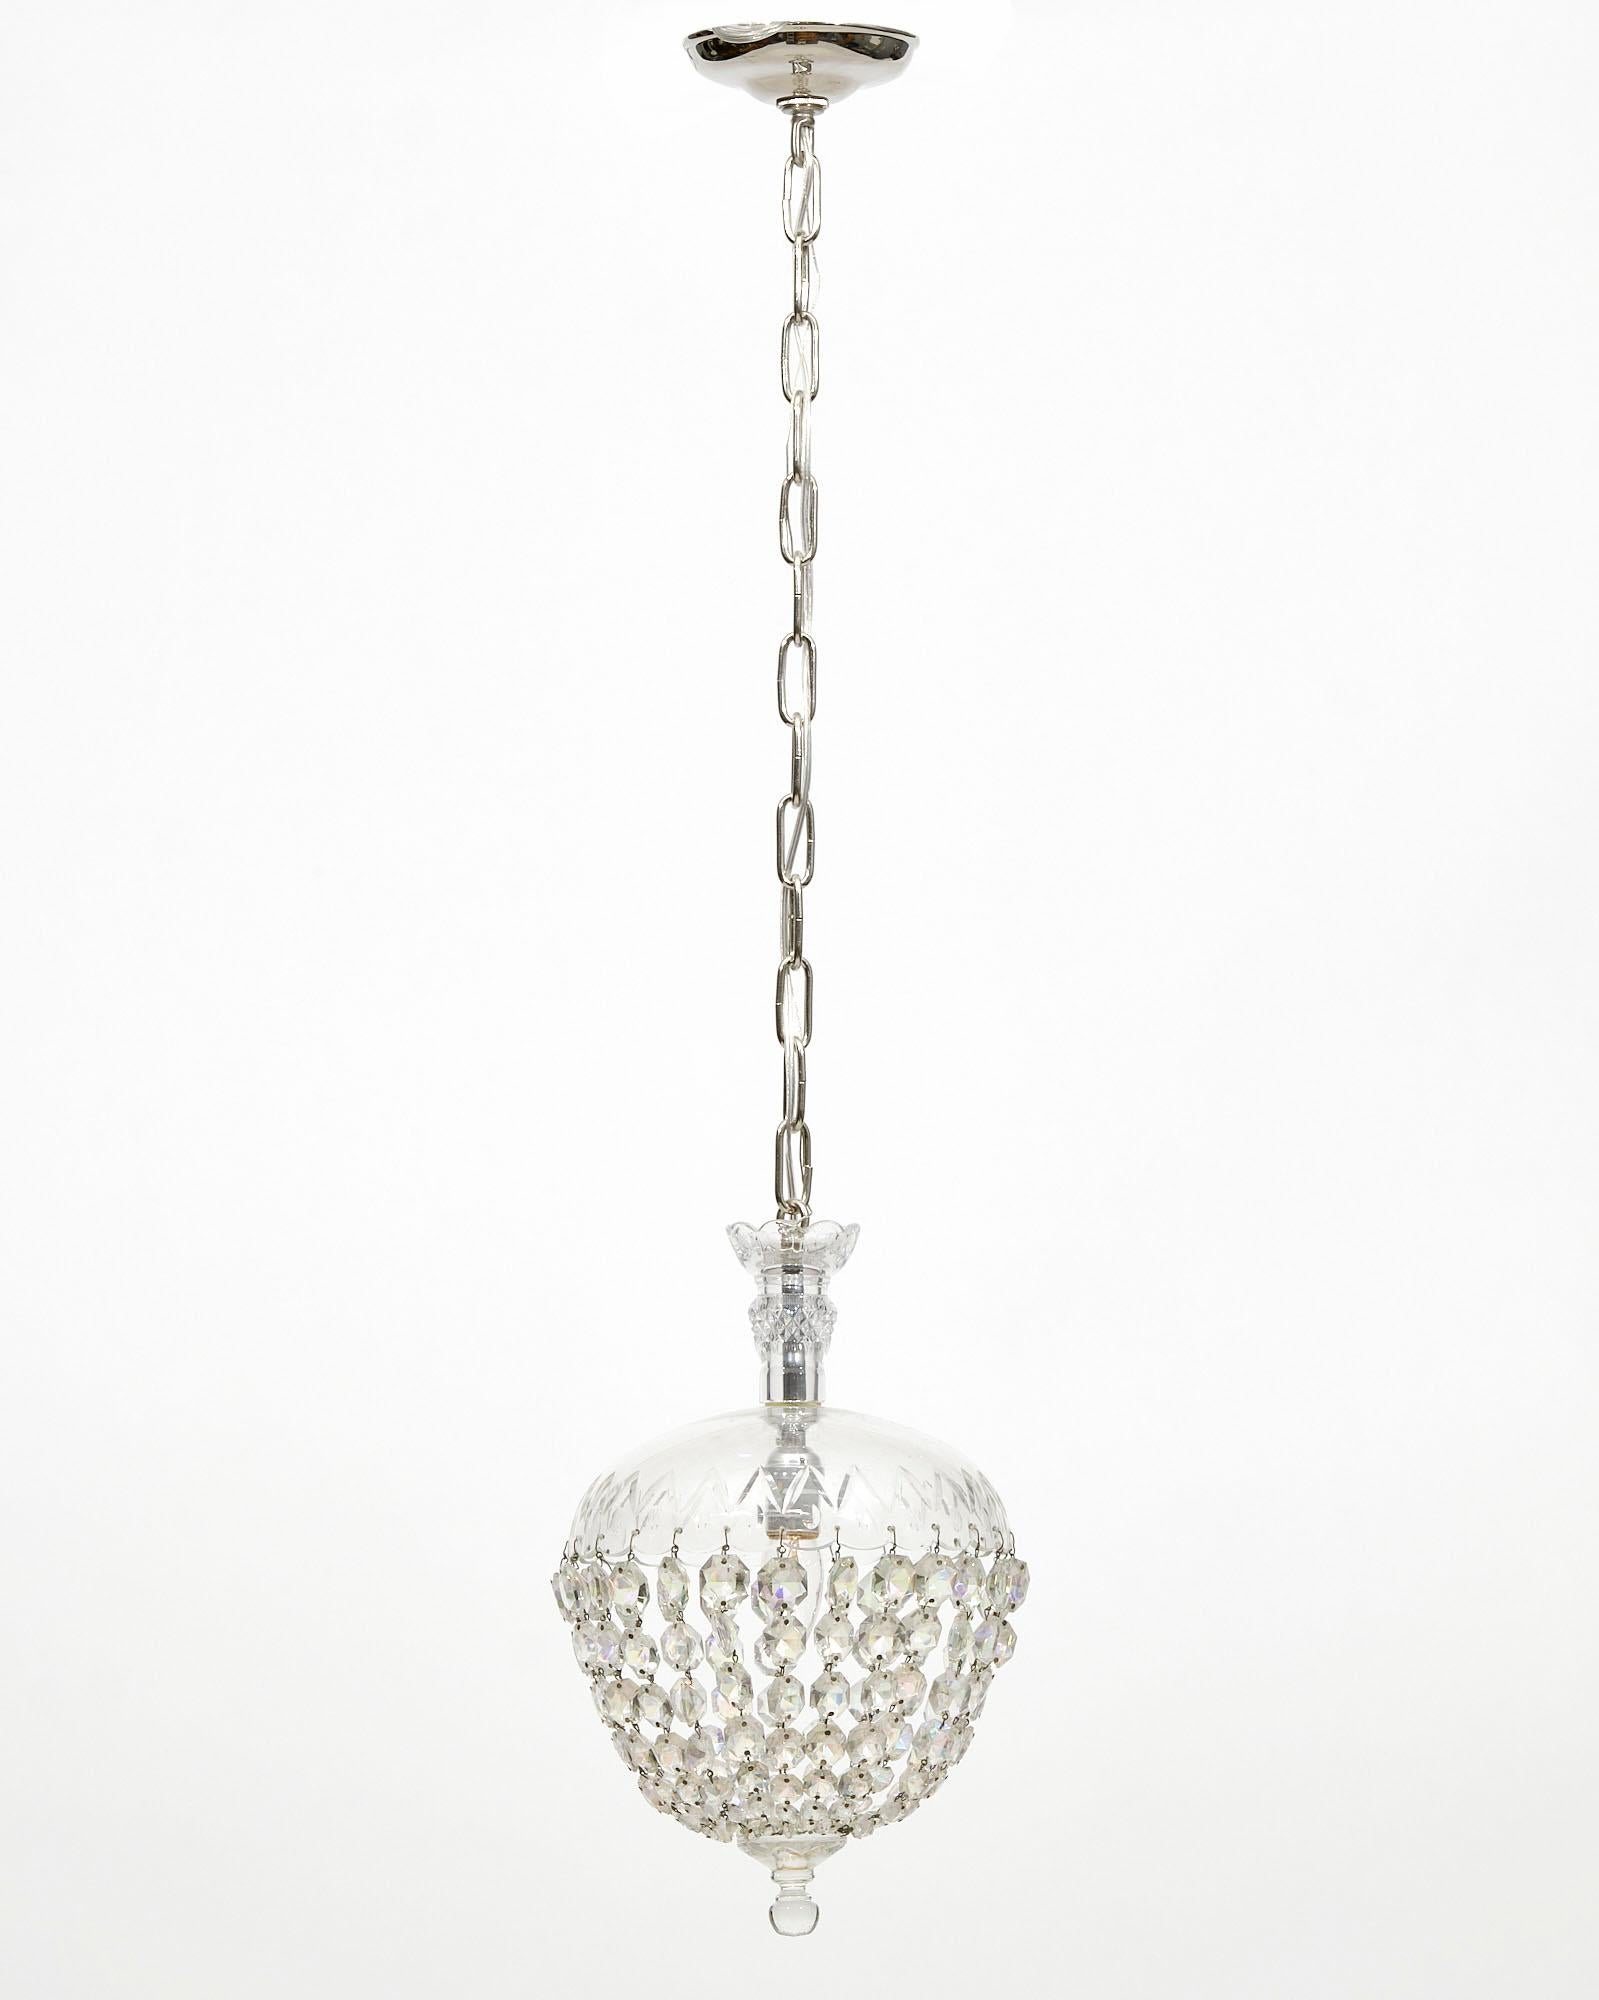 Chandelier from France made of crystal in the typical bell shape by Baccarat. This piece has been newly wired to fit US standards.
Measure: The current height from ceiling is 43